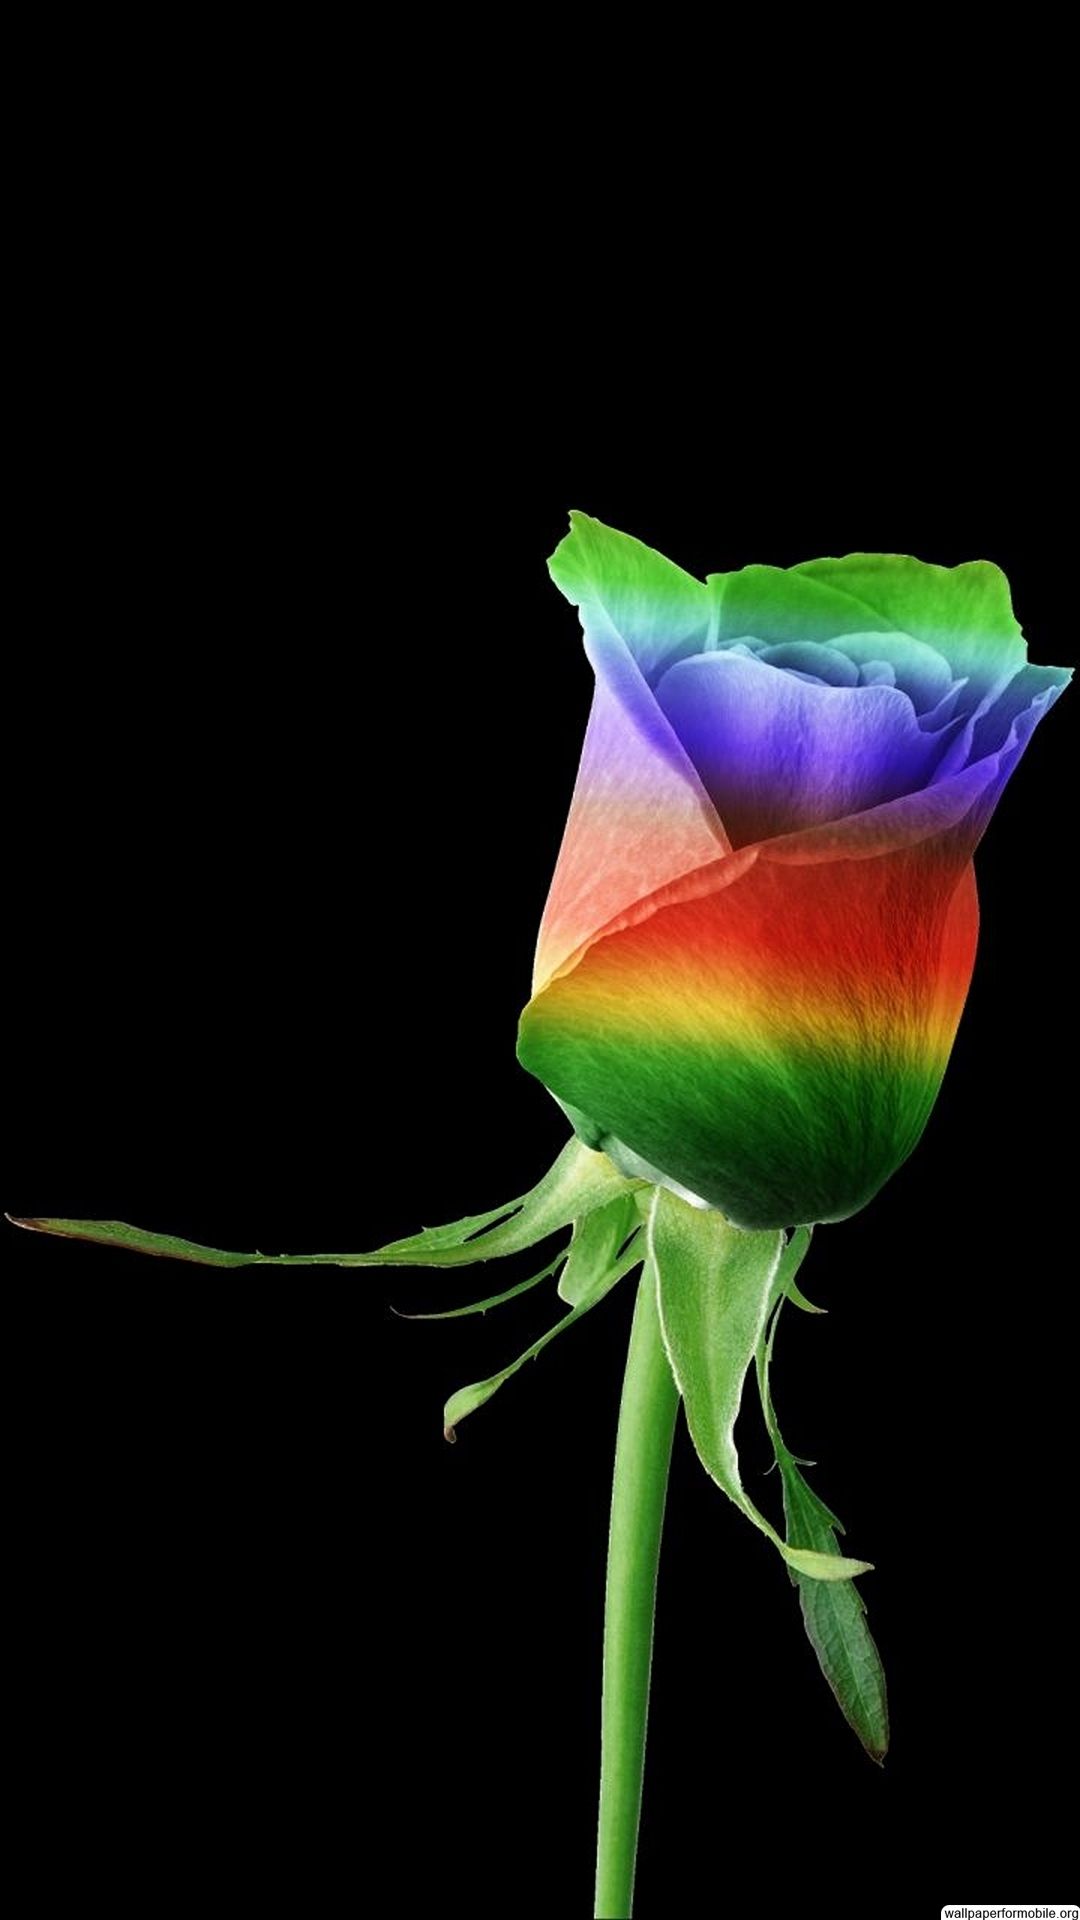 3d hd wallpapers for mobile free download,rainbow rose,rose,flower,rose family,petal